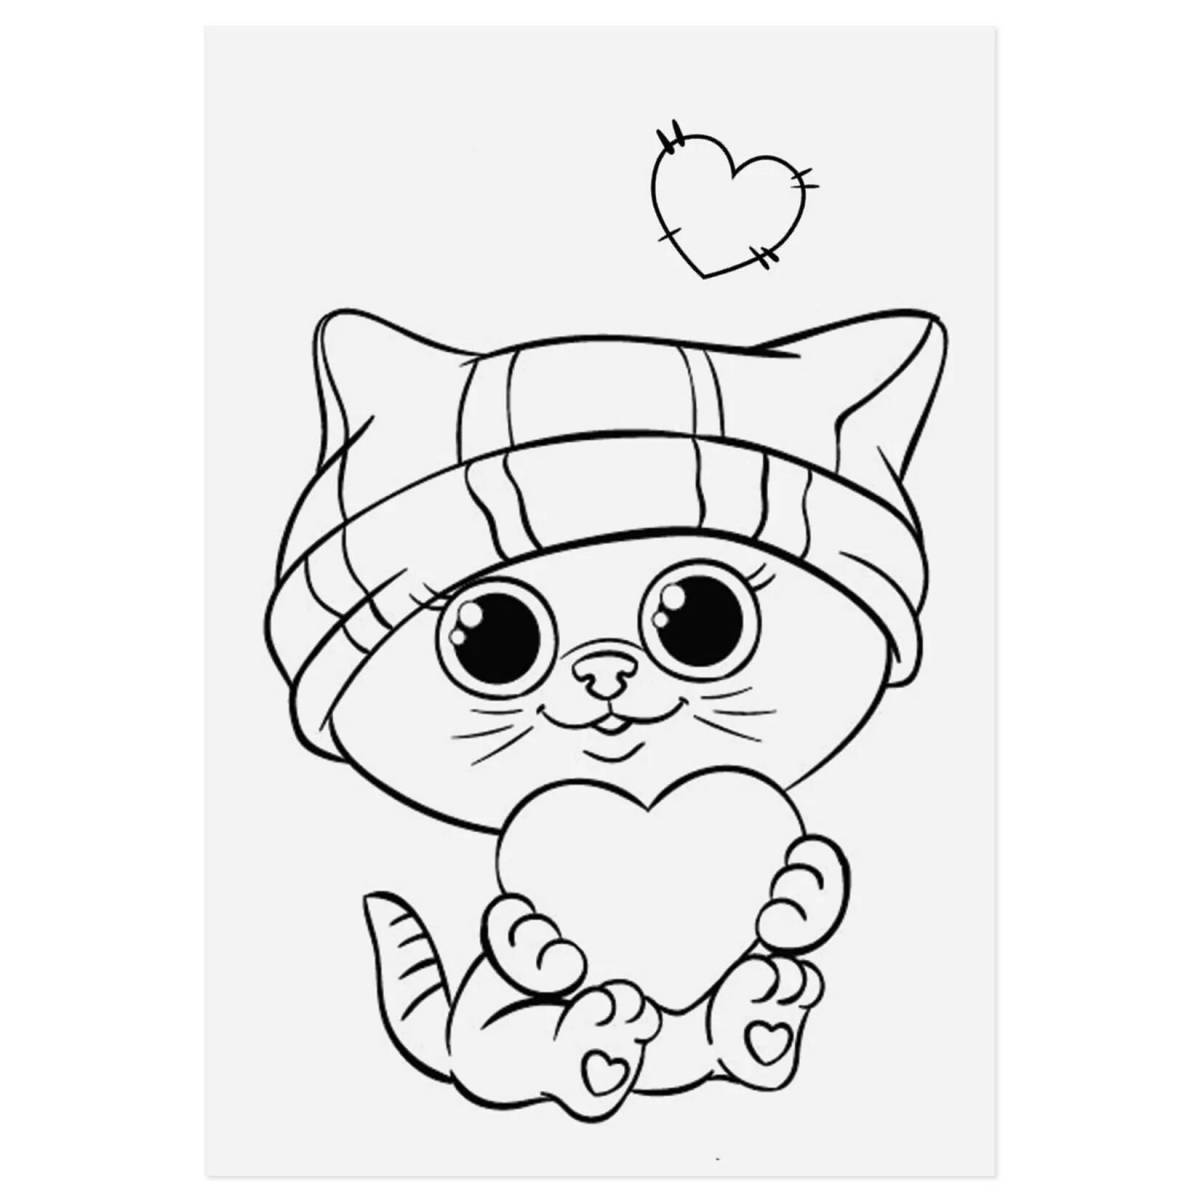 Adorable little cute kittens coloring book